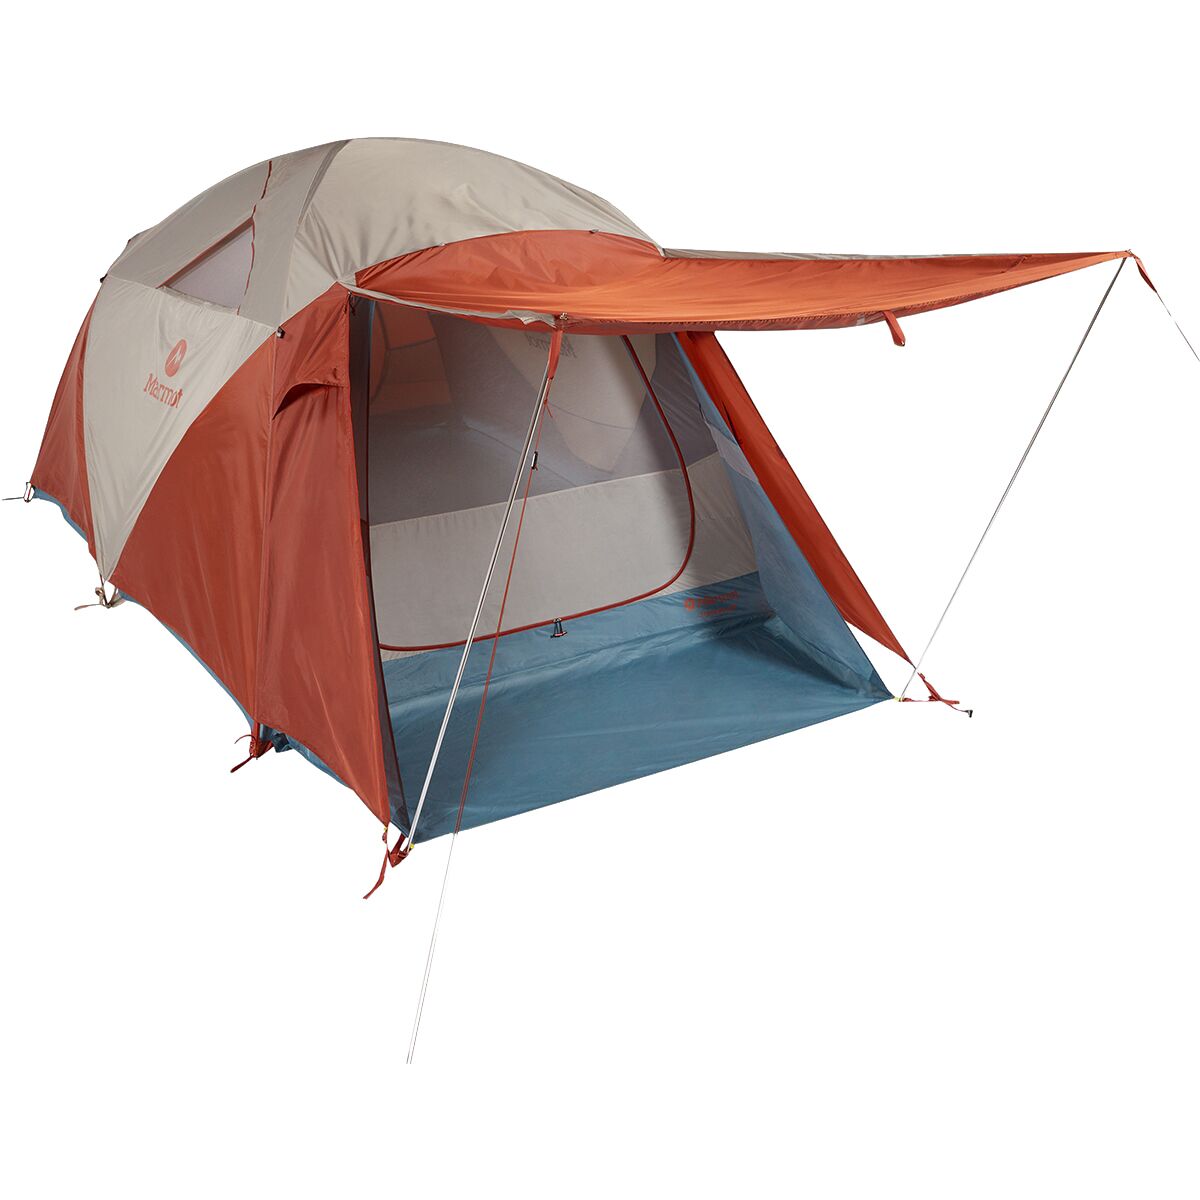 Camping Gear On Sale